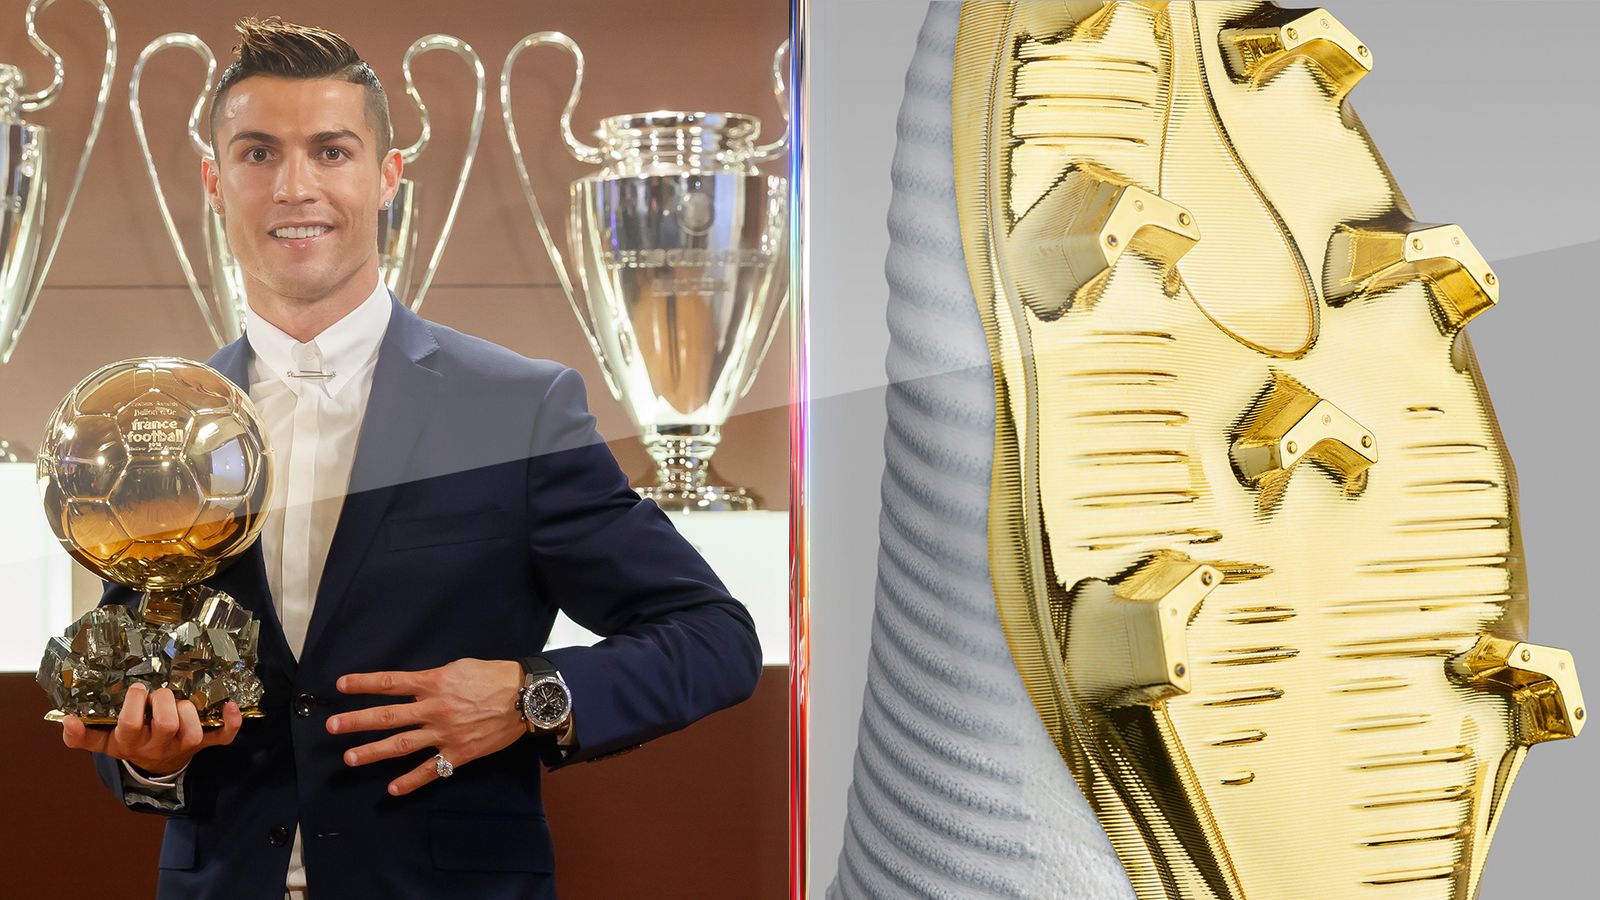 Cristiano Ronaldo honoured with golden boots after Ballon d'Or win